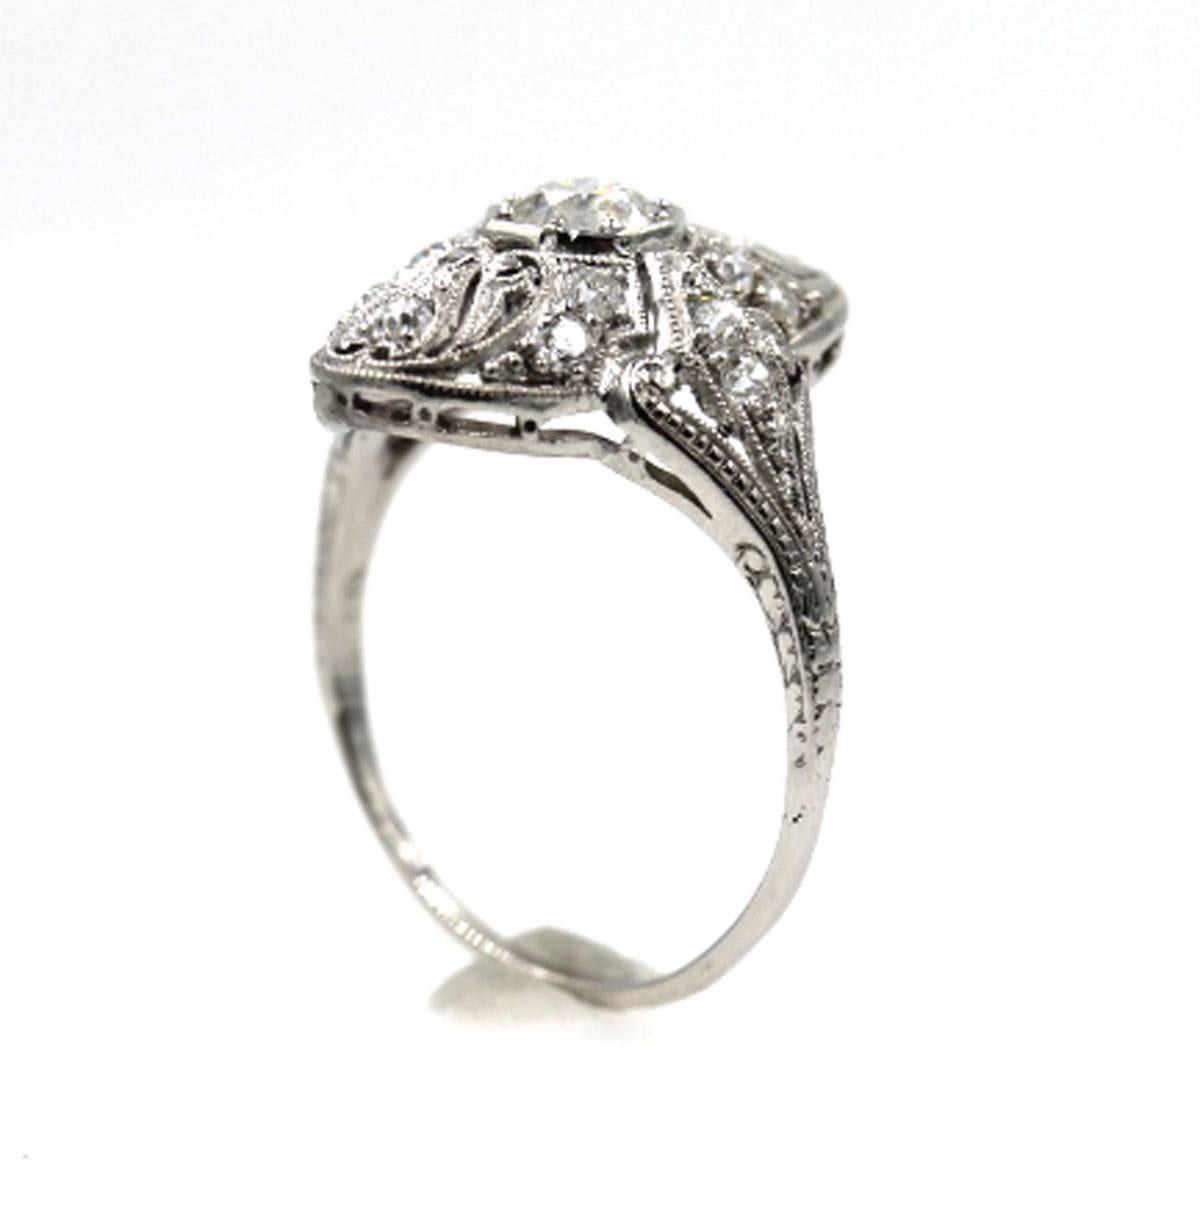 This gorgeous Art Deco ring features a .47 carat Old European Cut diamond with F color and VS quality. GIA certificate number 1156584328. Around the center are 1/2 carat total weight of side diamonds set in platinum. The ring measures 20mm from top